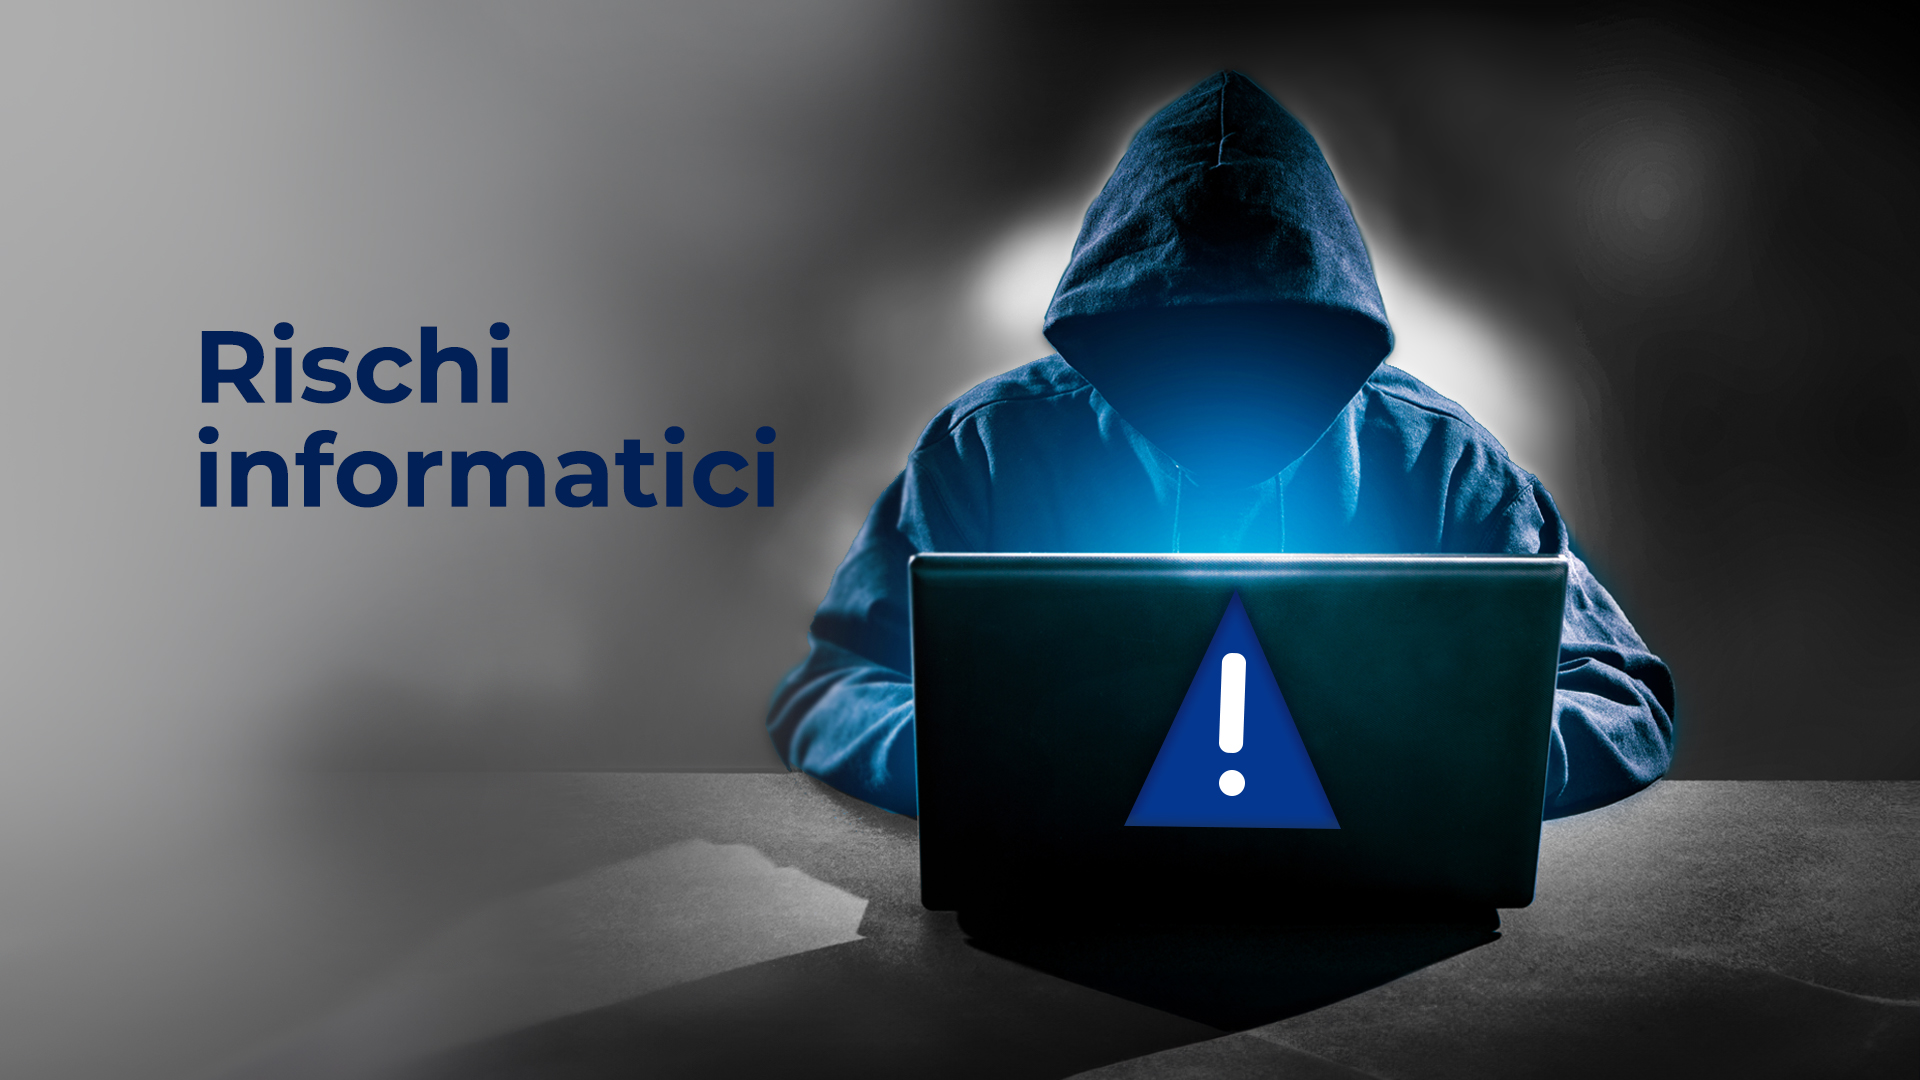 strong authentication - attacchi informatici